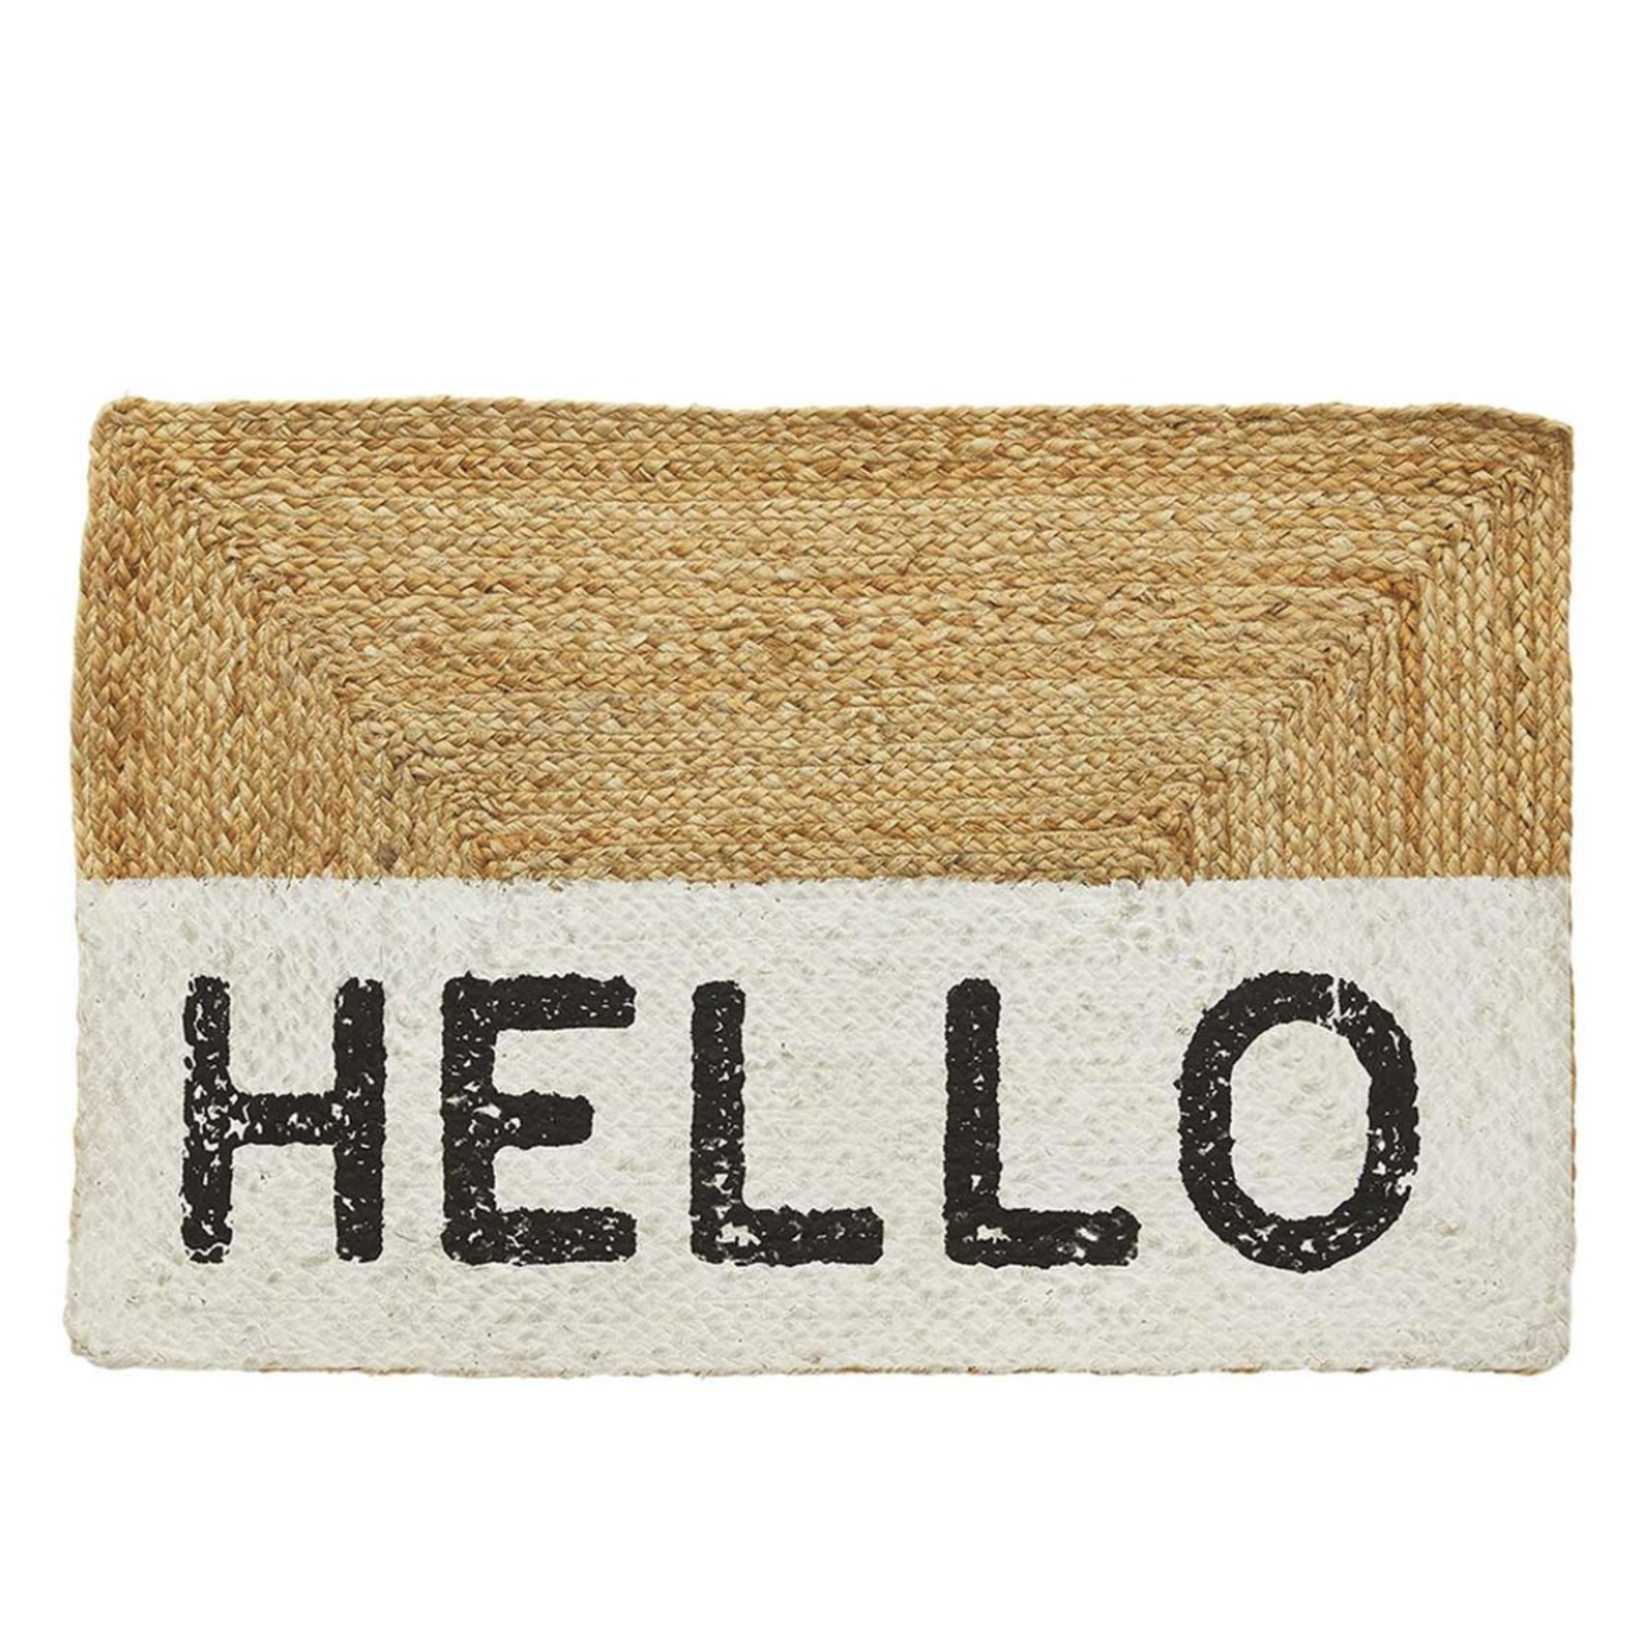 Outside The Box 36x23 "Hello" Braided Jute Doormat